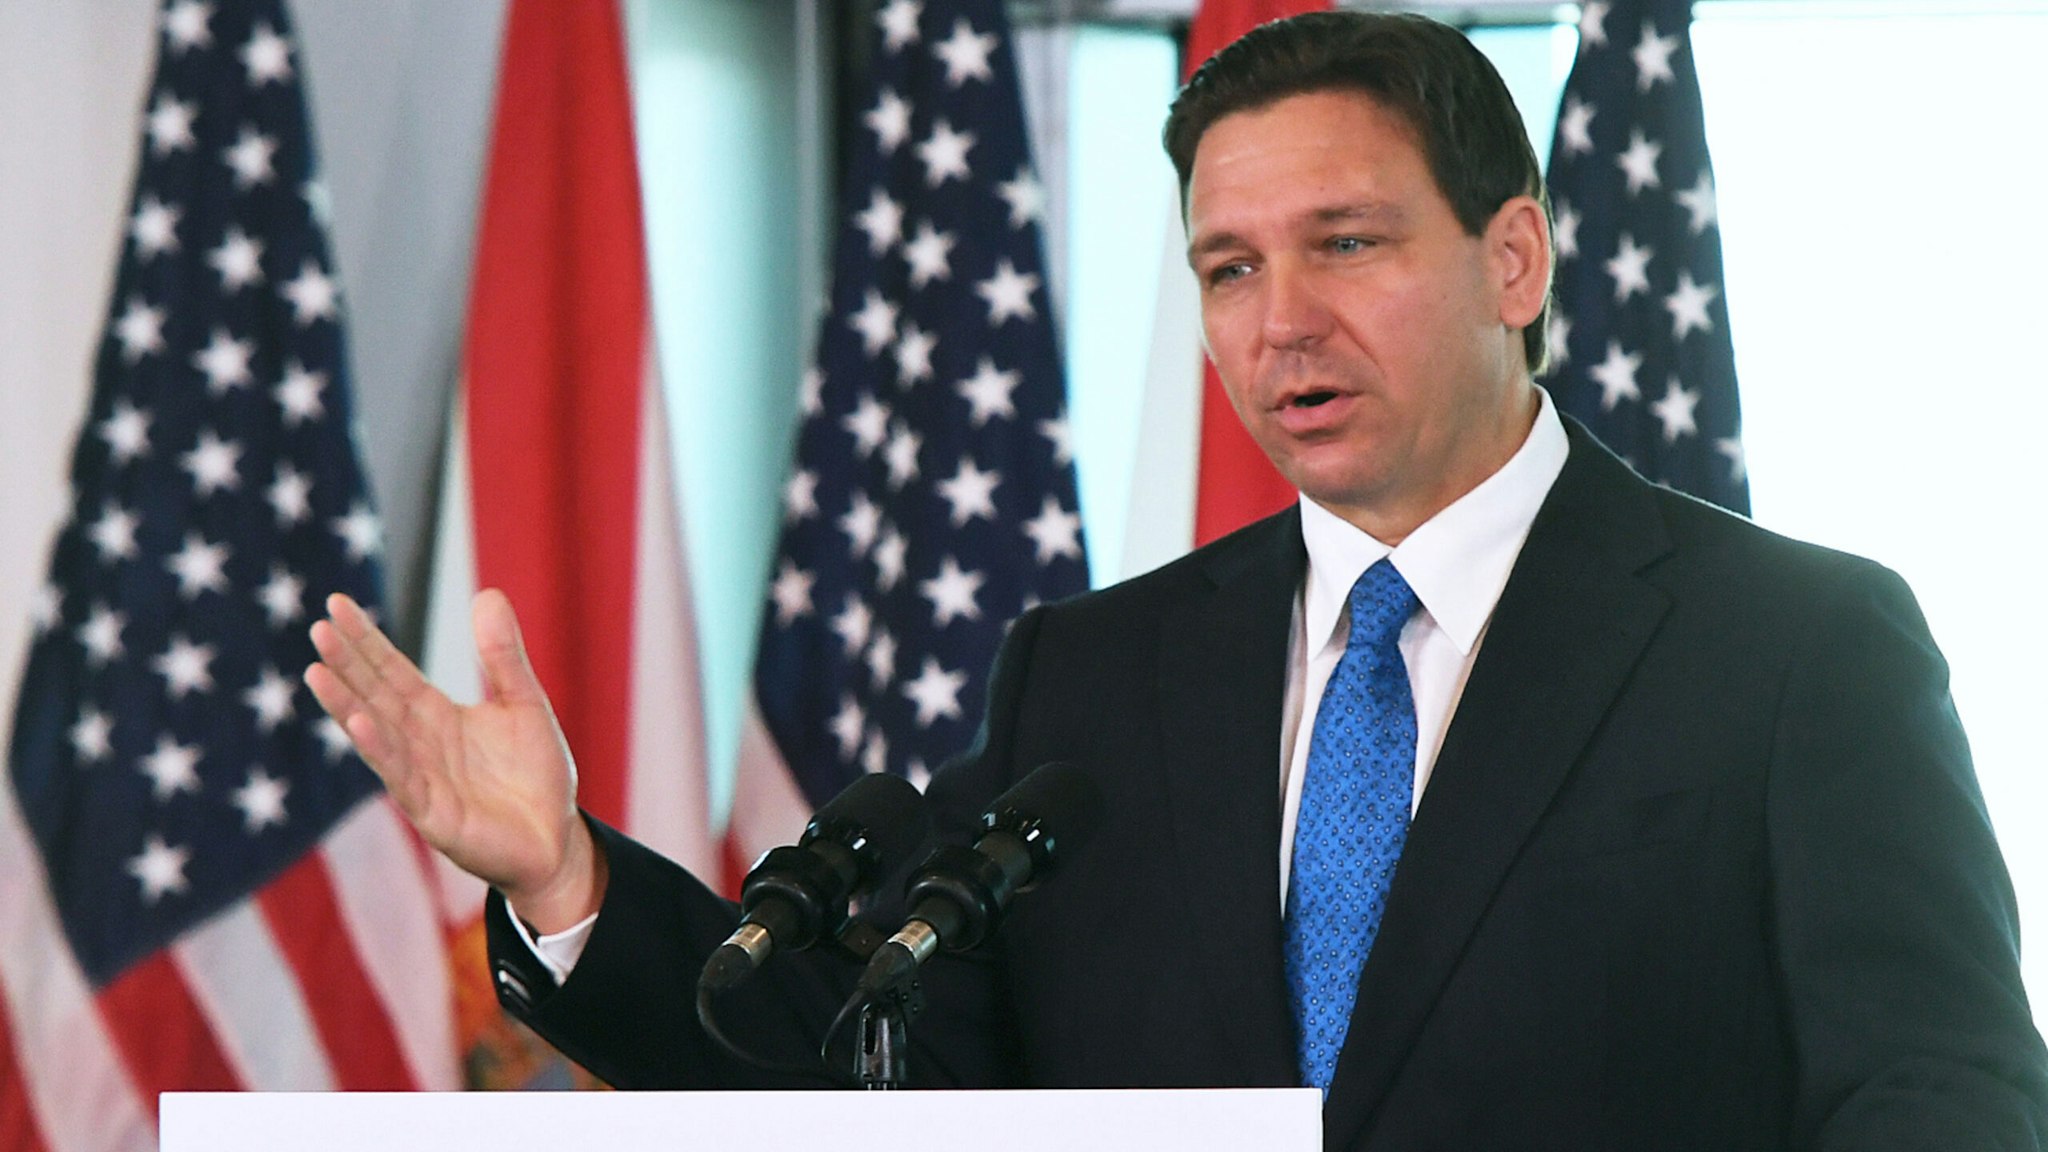 AUBURNDALE, FLORIDA, UNITED STATES - 2023/01/30: Florida Gov. Ron DeSantis speaks at a press conference to announce the Moving Florida Forward initiative at the SunTrax Test Facility in Auburndale, Florida. If passed by the legislature, the proposal would expedite transportation projects over the next four years with $7 billion in funding.